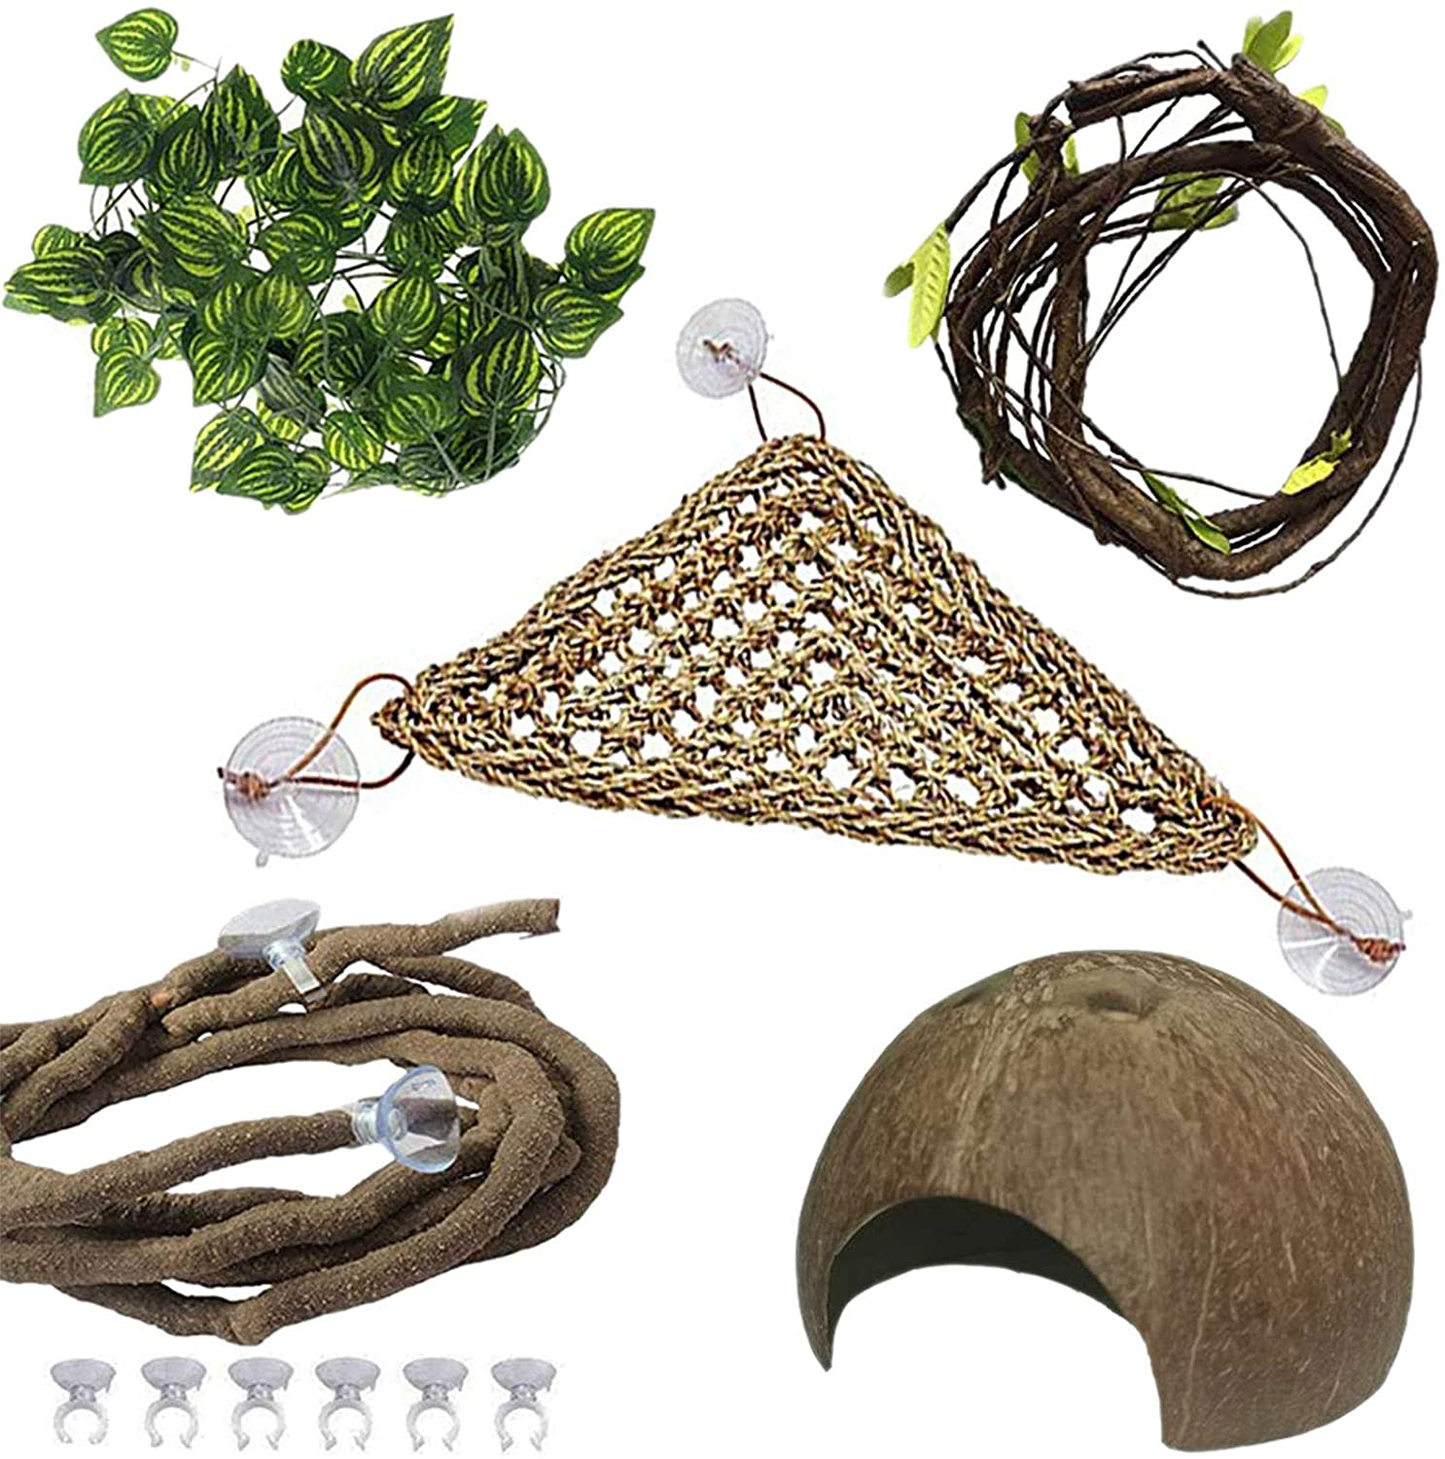 PINVNBY Bearded Dragon Tank Accessories,Lizard Habitat Hammock Reptile Natural Seagrass Coconut Shell Toy Jungle Climber Bendable Vines Leaves Decor for Climbing Snakes Hermit Crabs Gecko or Chameleon